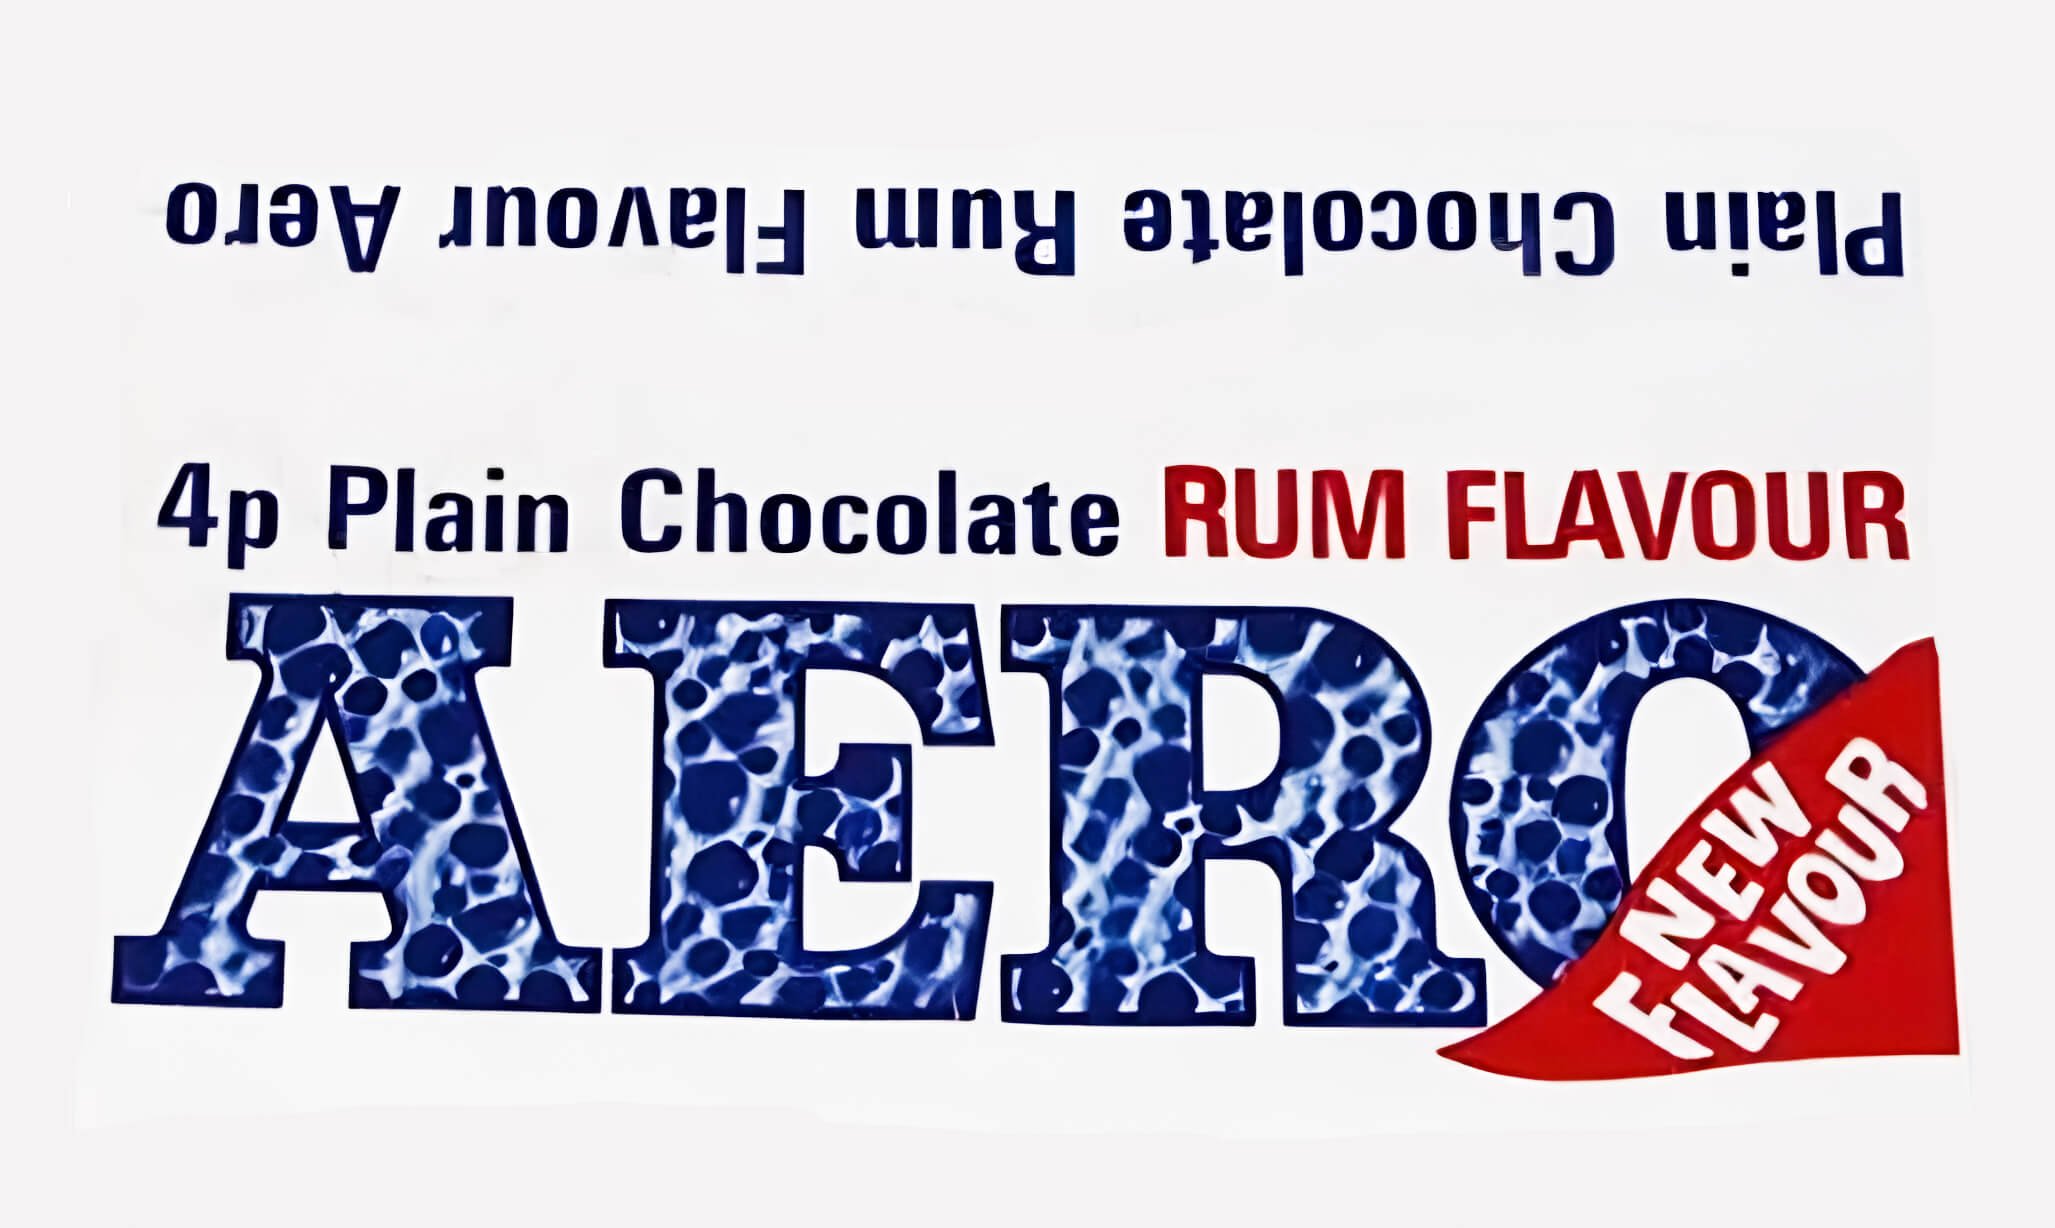 Plain Chocolate Rum Flavour Aero wrapper from the 1970s, white with blue text. Price 4p